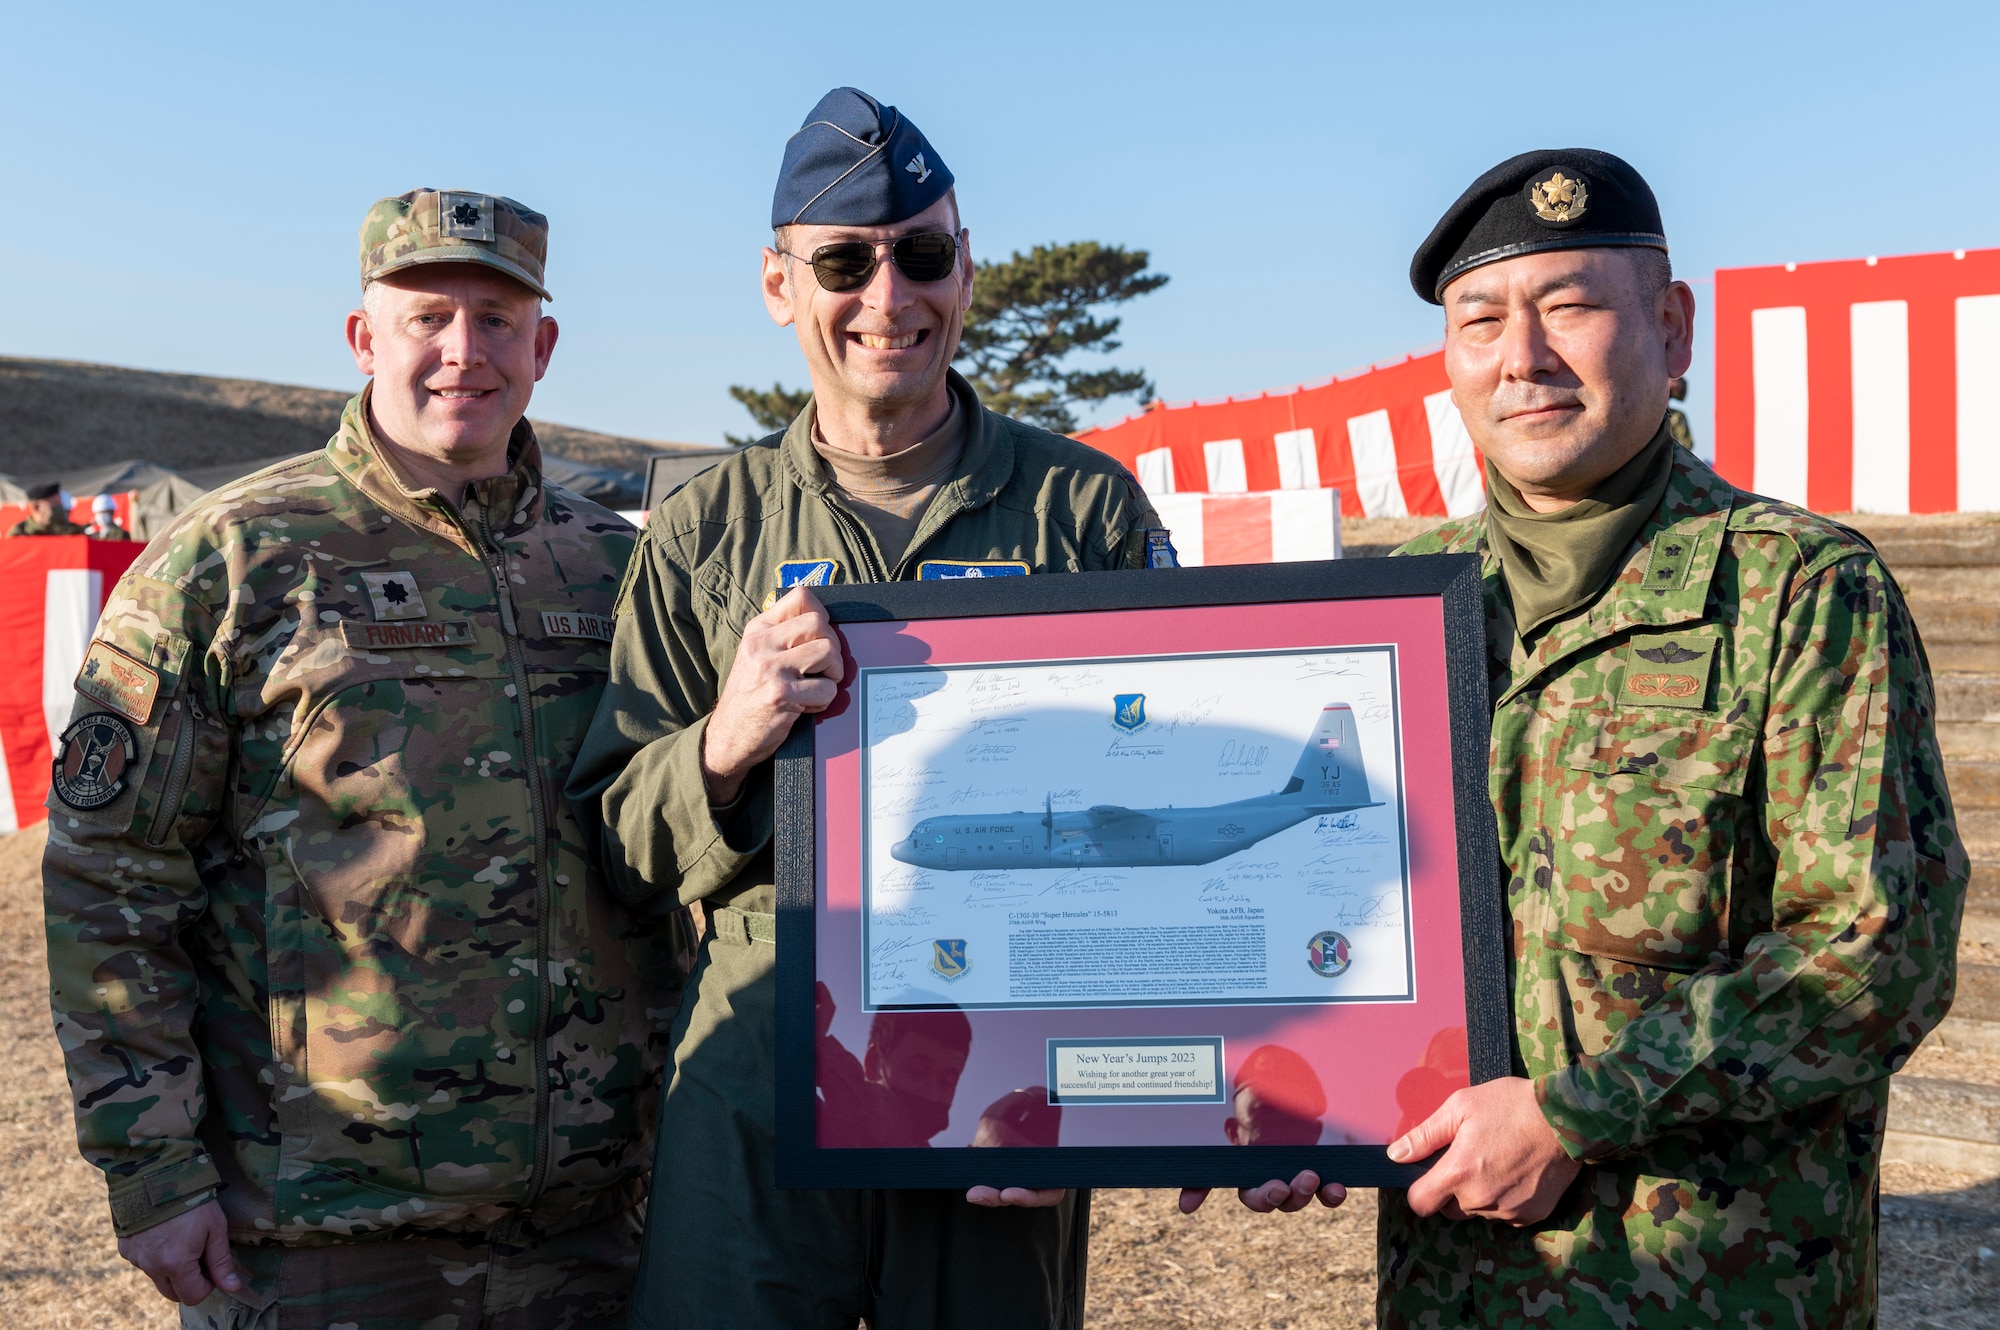 Three soldiers pose for a photo while holding a framed picture